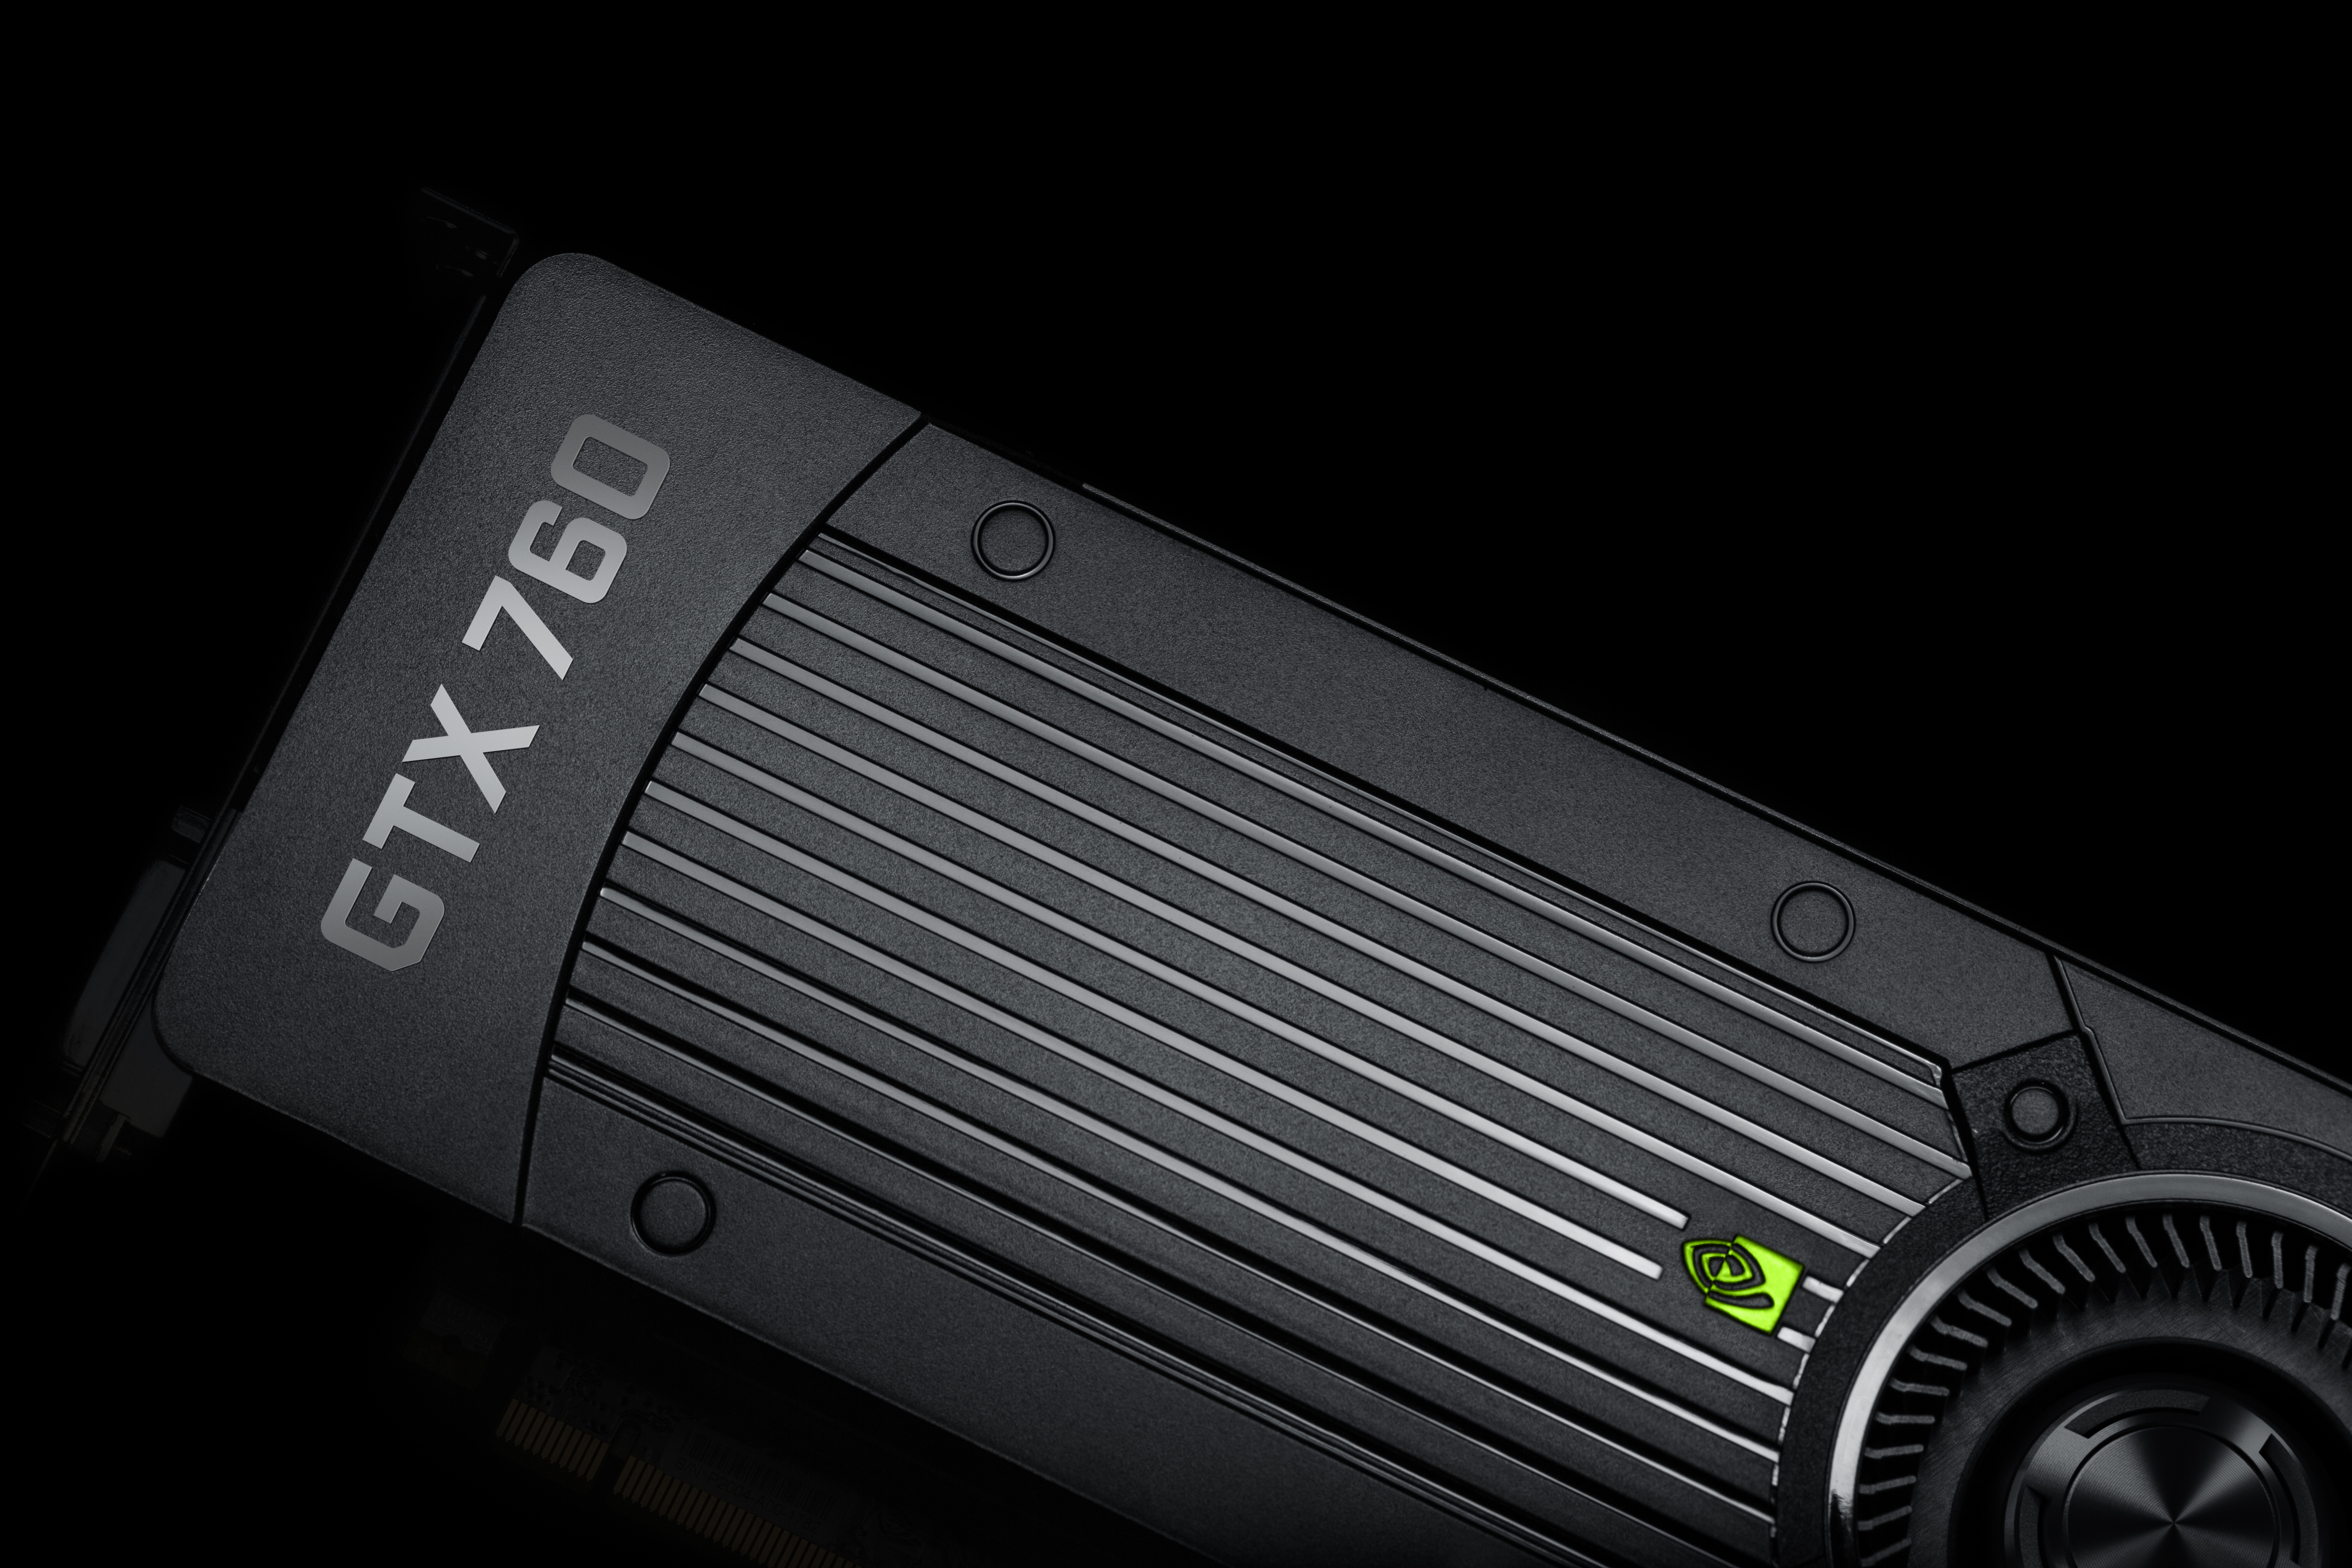 Nvidia Geforce Gtx 760 Review The New Enthusiast Kepler